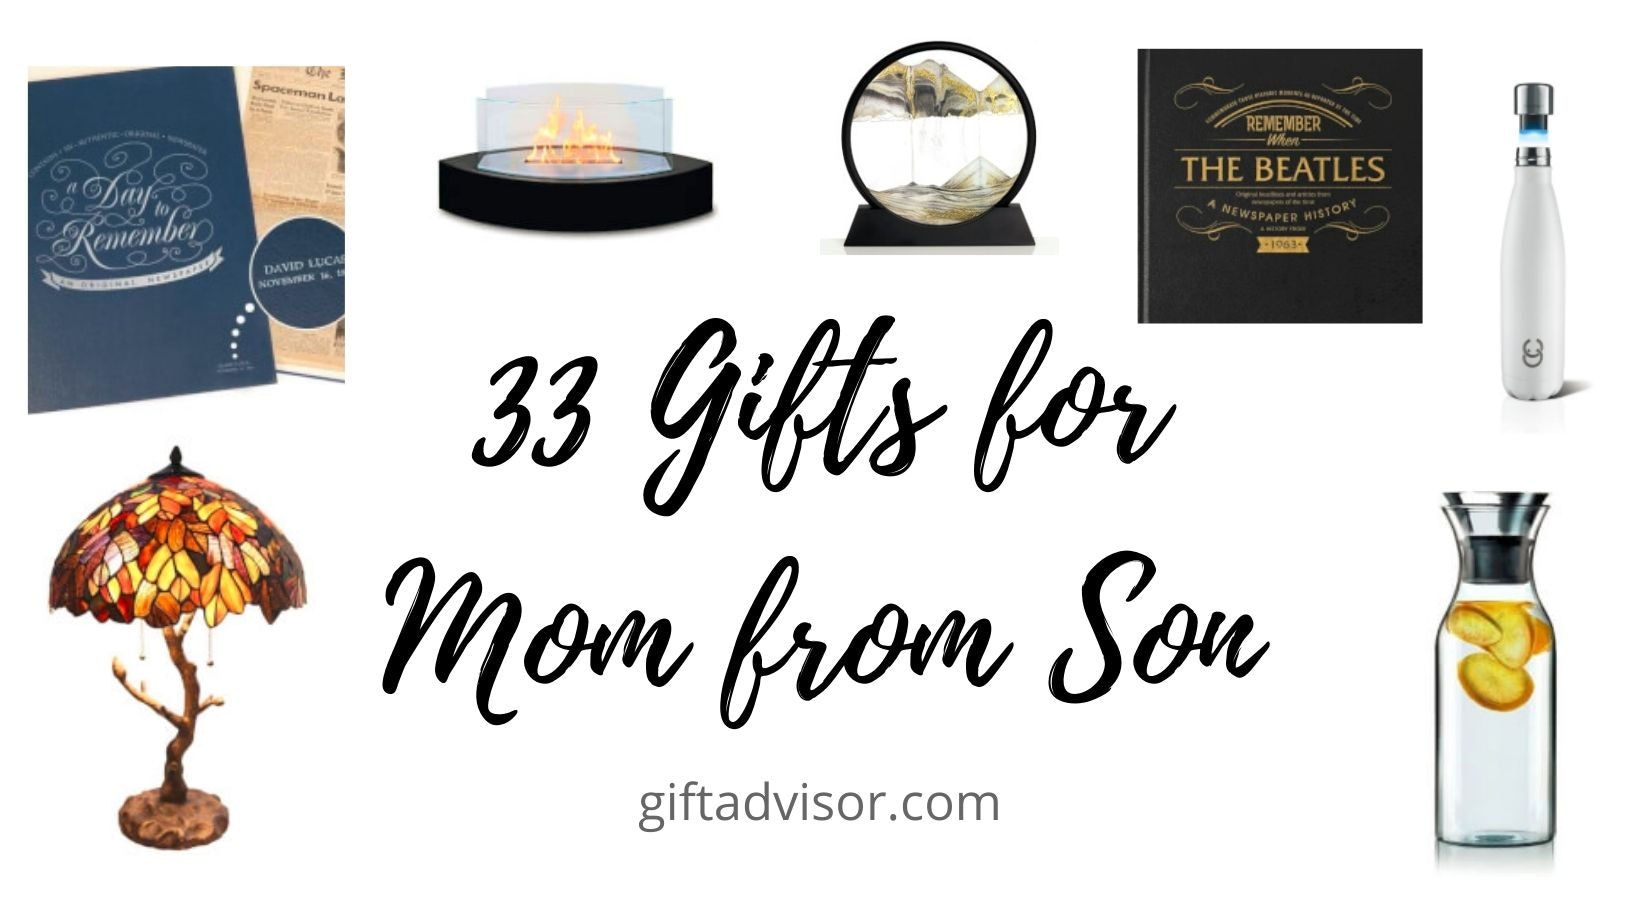 https://giftadvisor.imgix.net/blog-images/33-gifts-for-mom-from-son.jpg?fit=crop&max-w=600&max-h=315